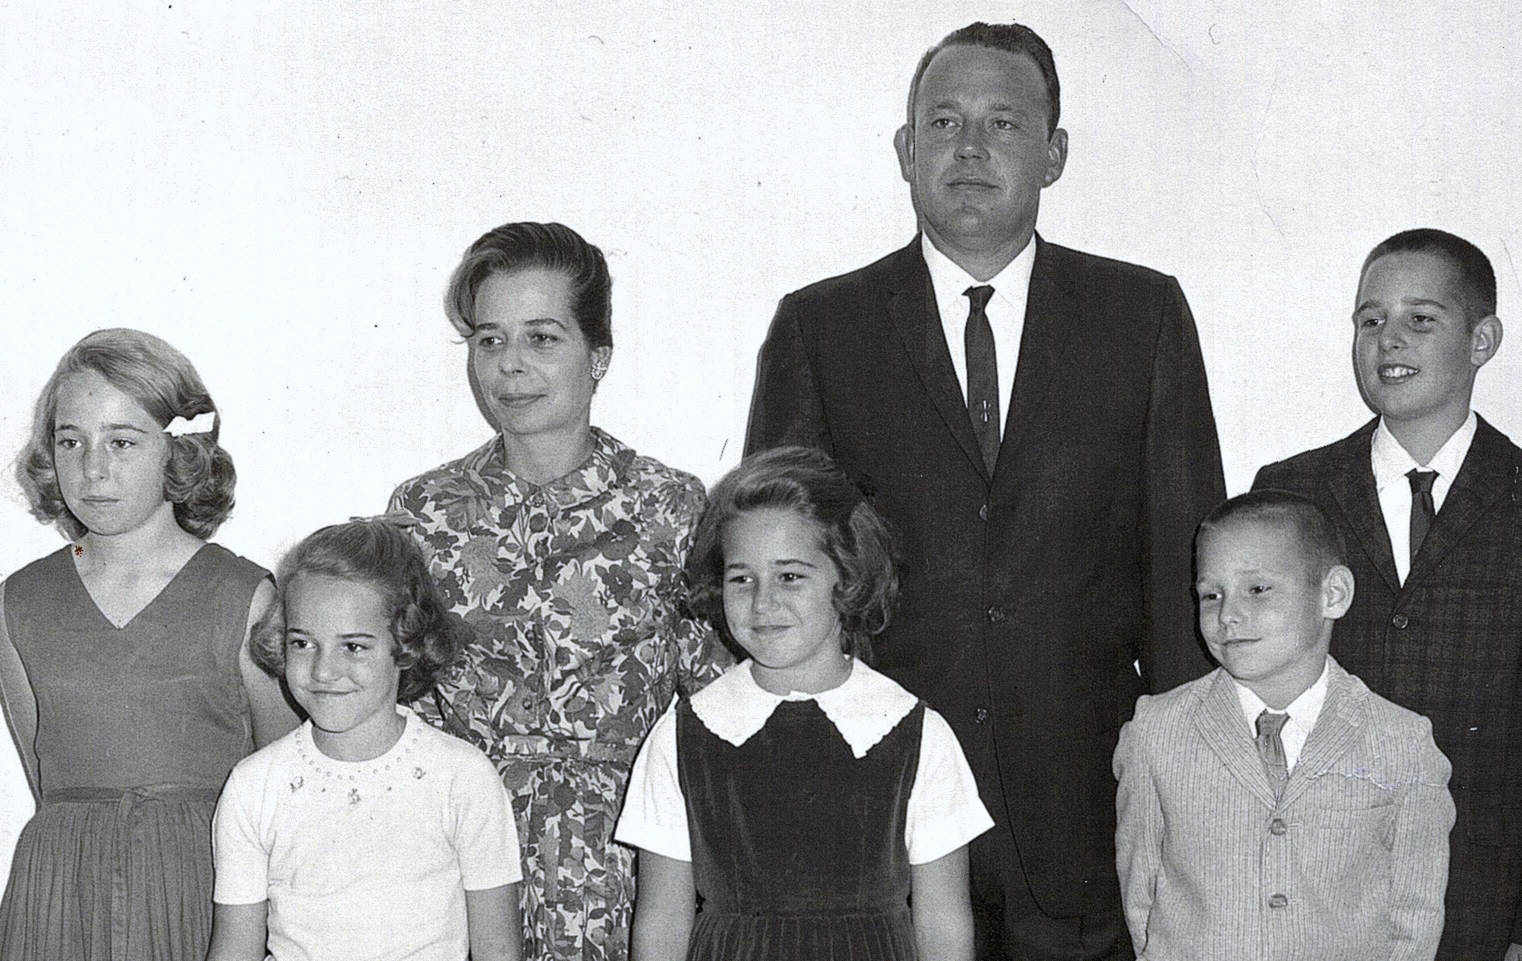 The family of Alvis Hoskins, Kimberly Anne's grandfather.